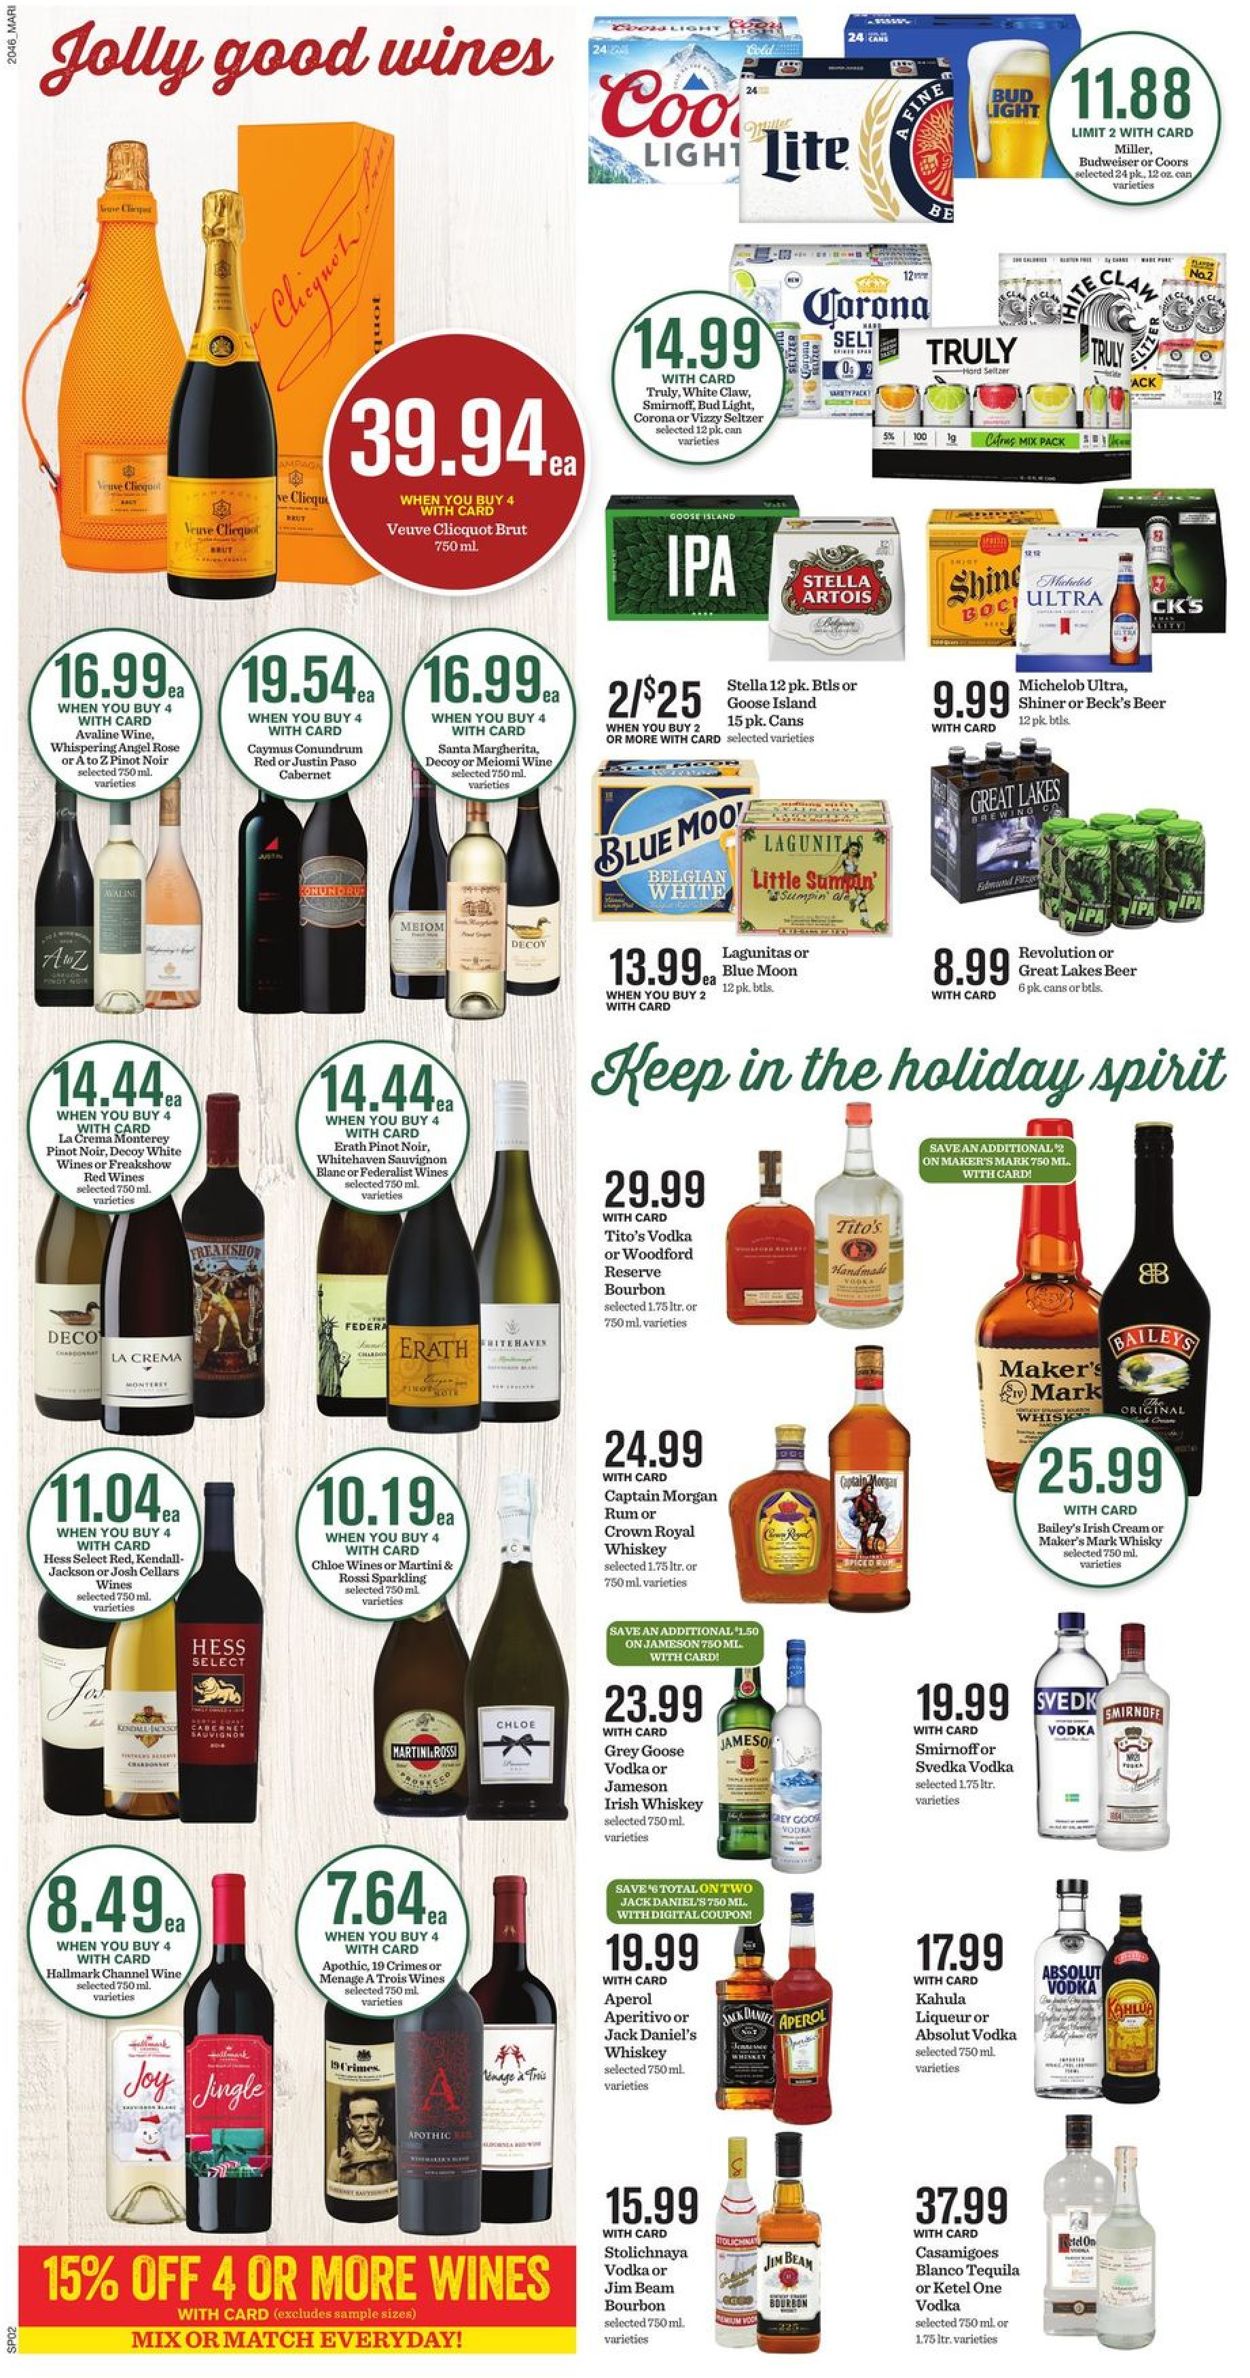 Mariano’s Ad from 12/16/2020